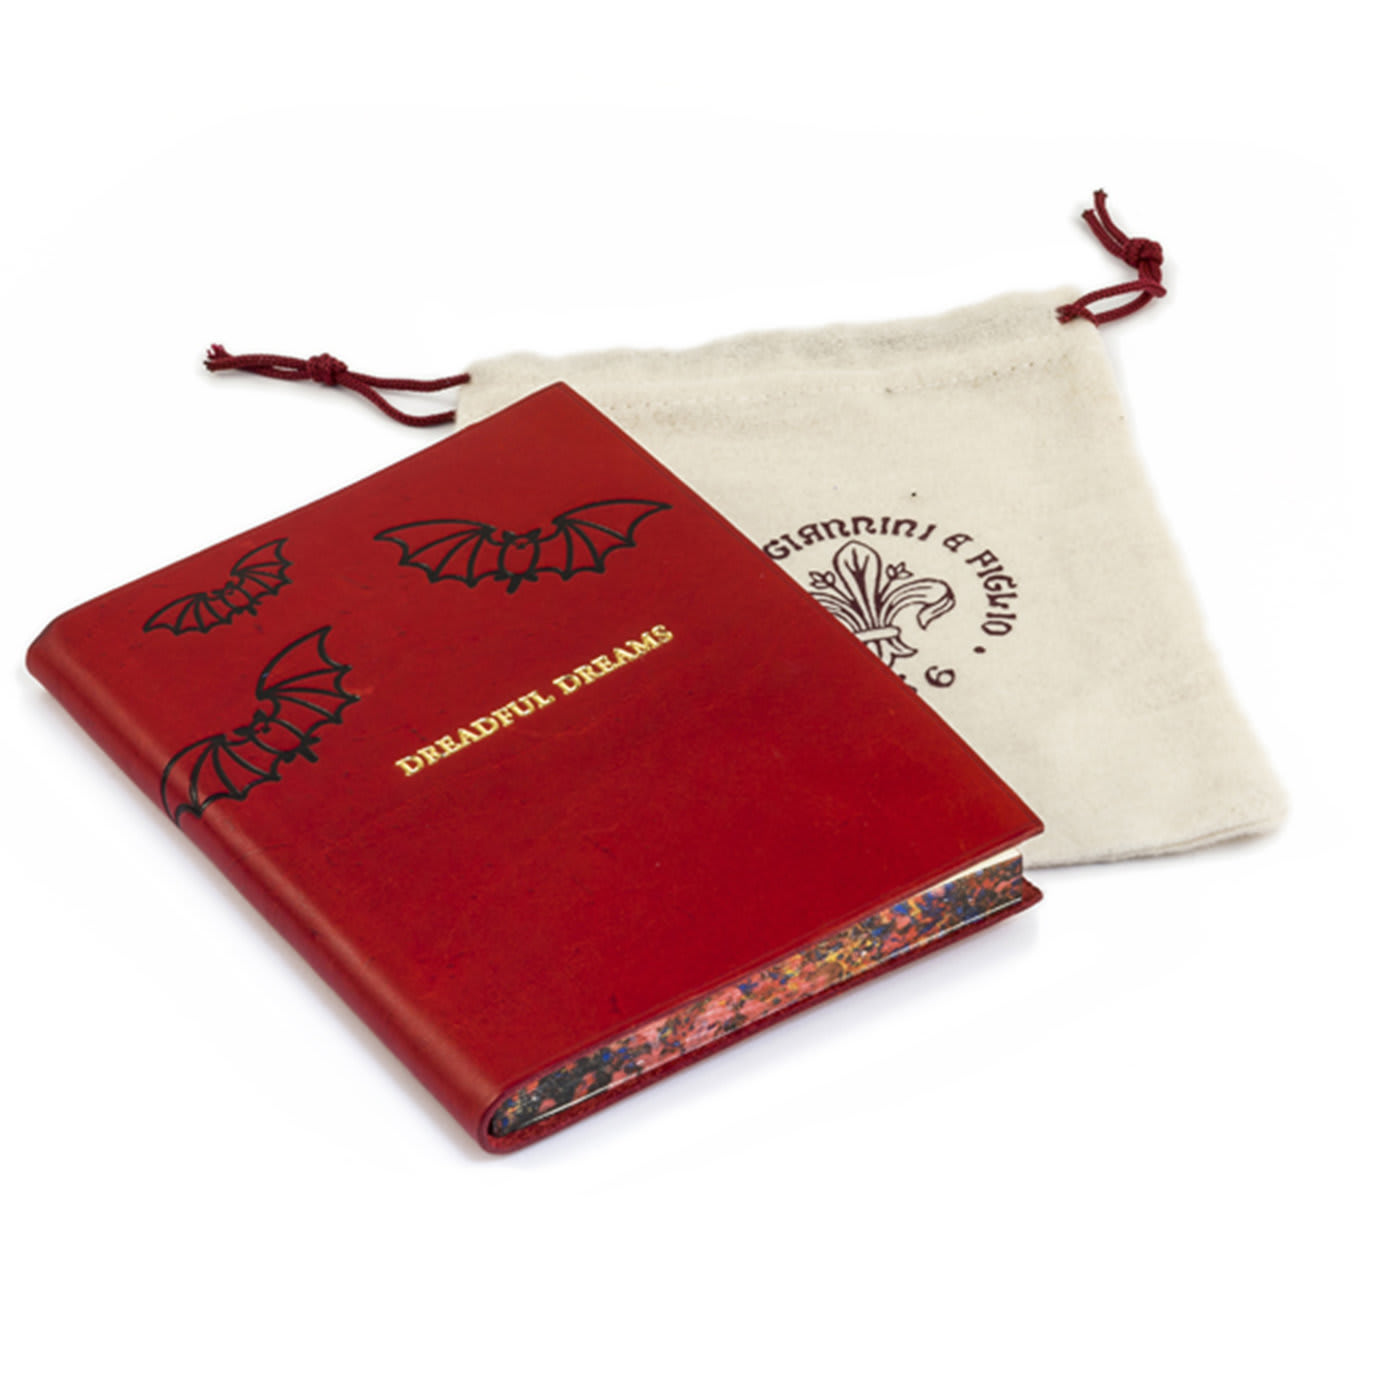 Dreadful Dreams Set of 2 Red Journals - Giannini